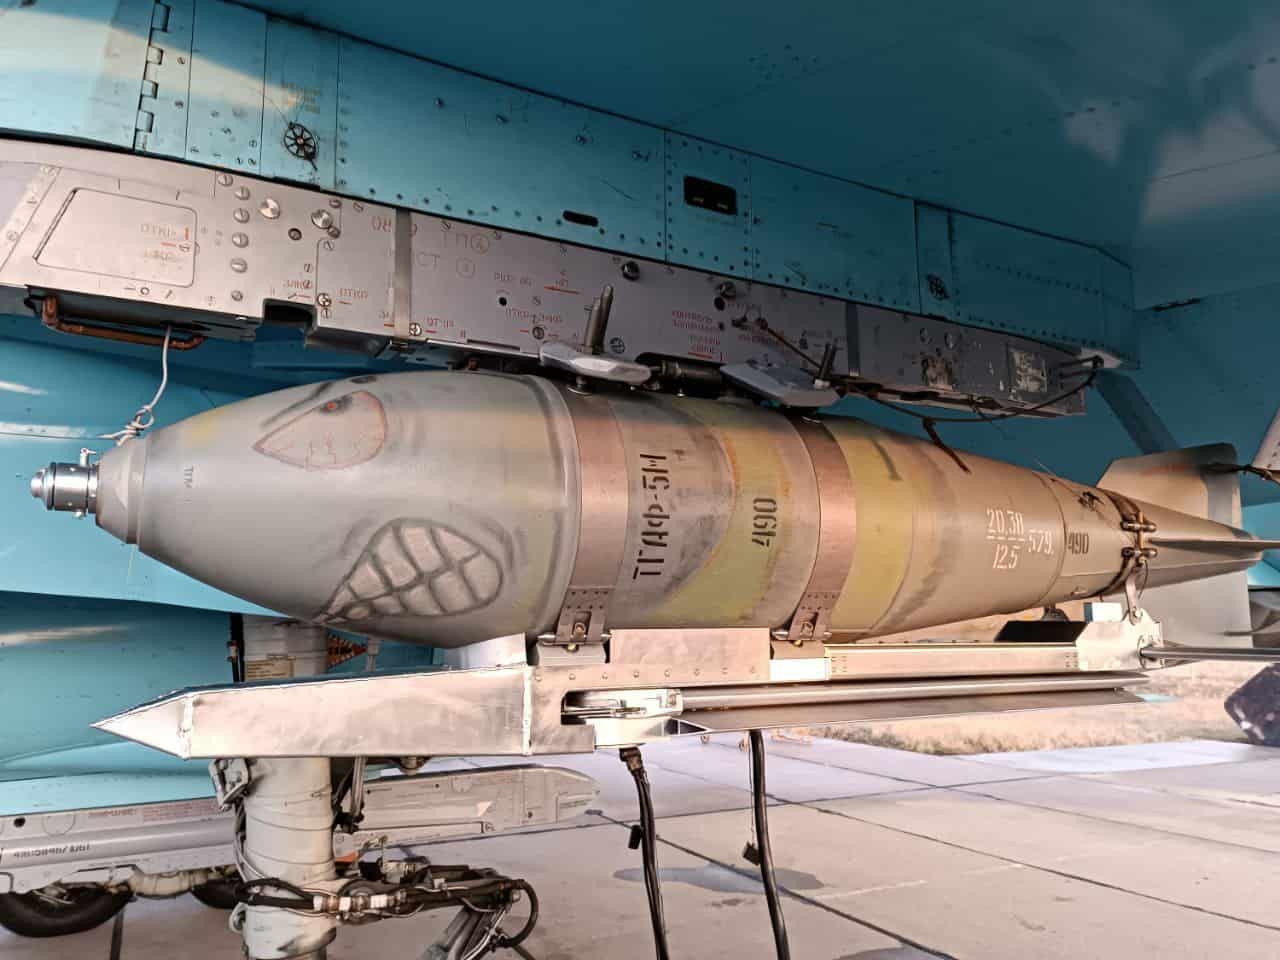 Ukrainian Air Force: Russia's Air Force arsenal includes a significant number of 1.5-ton glide bombs